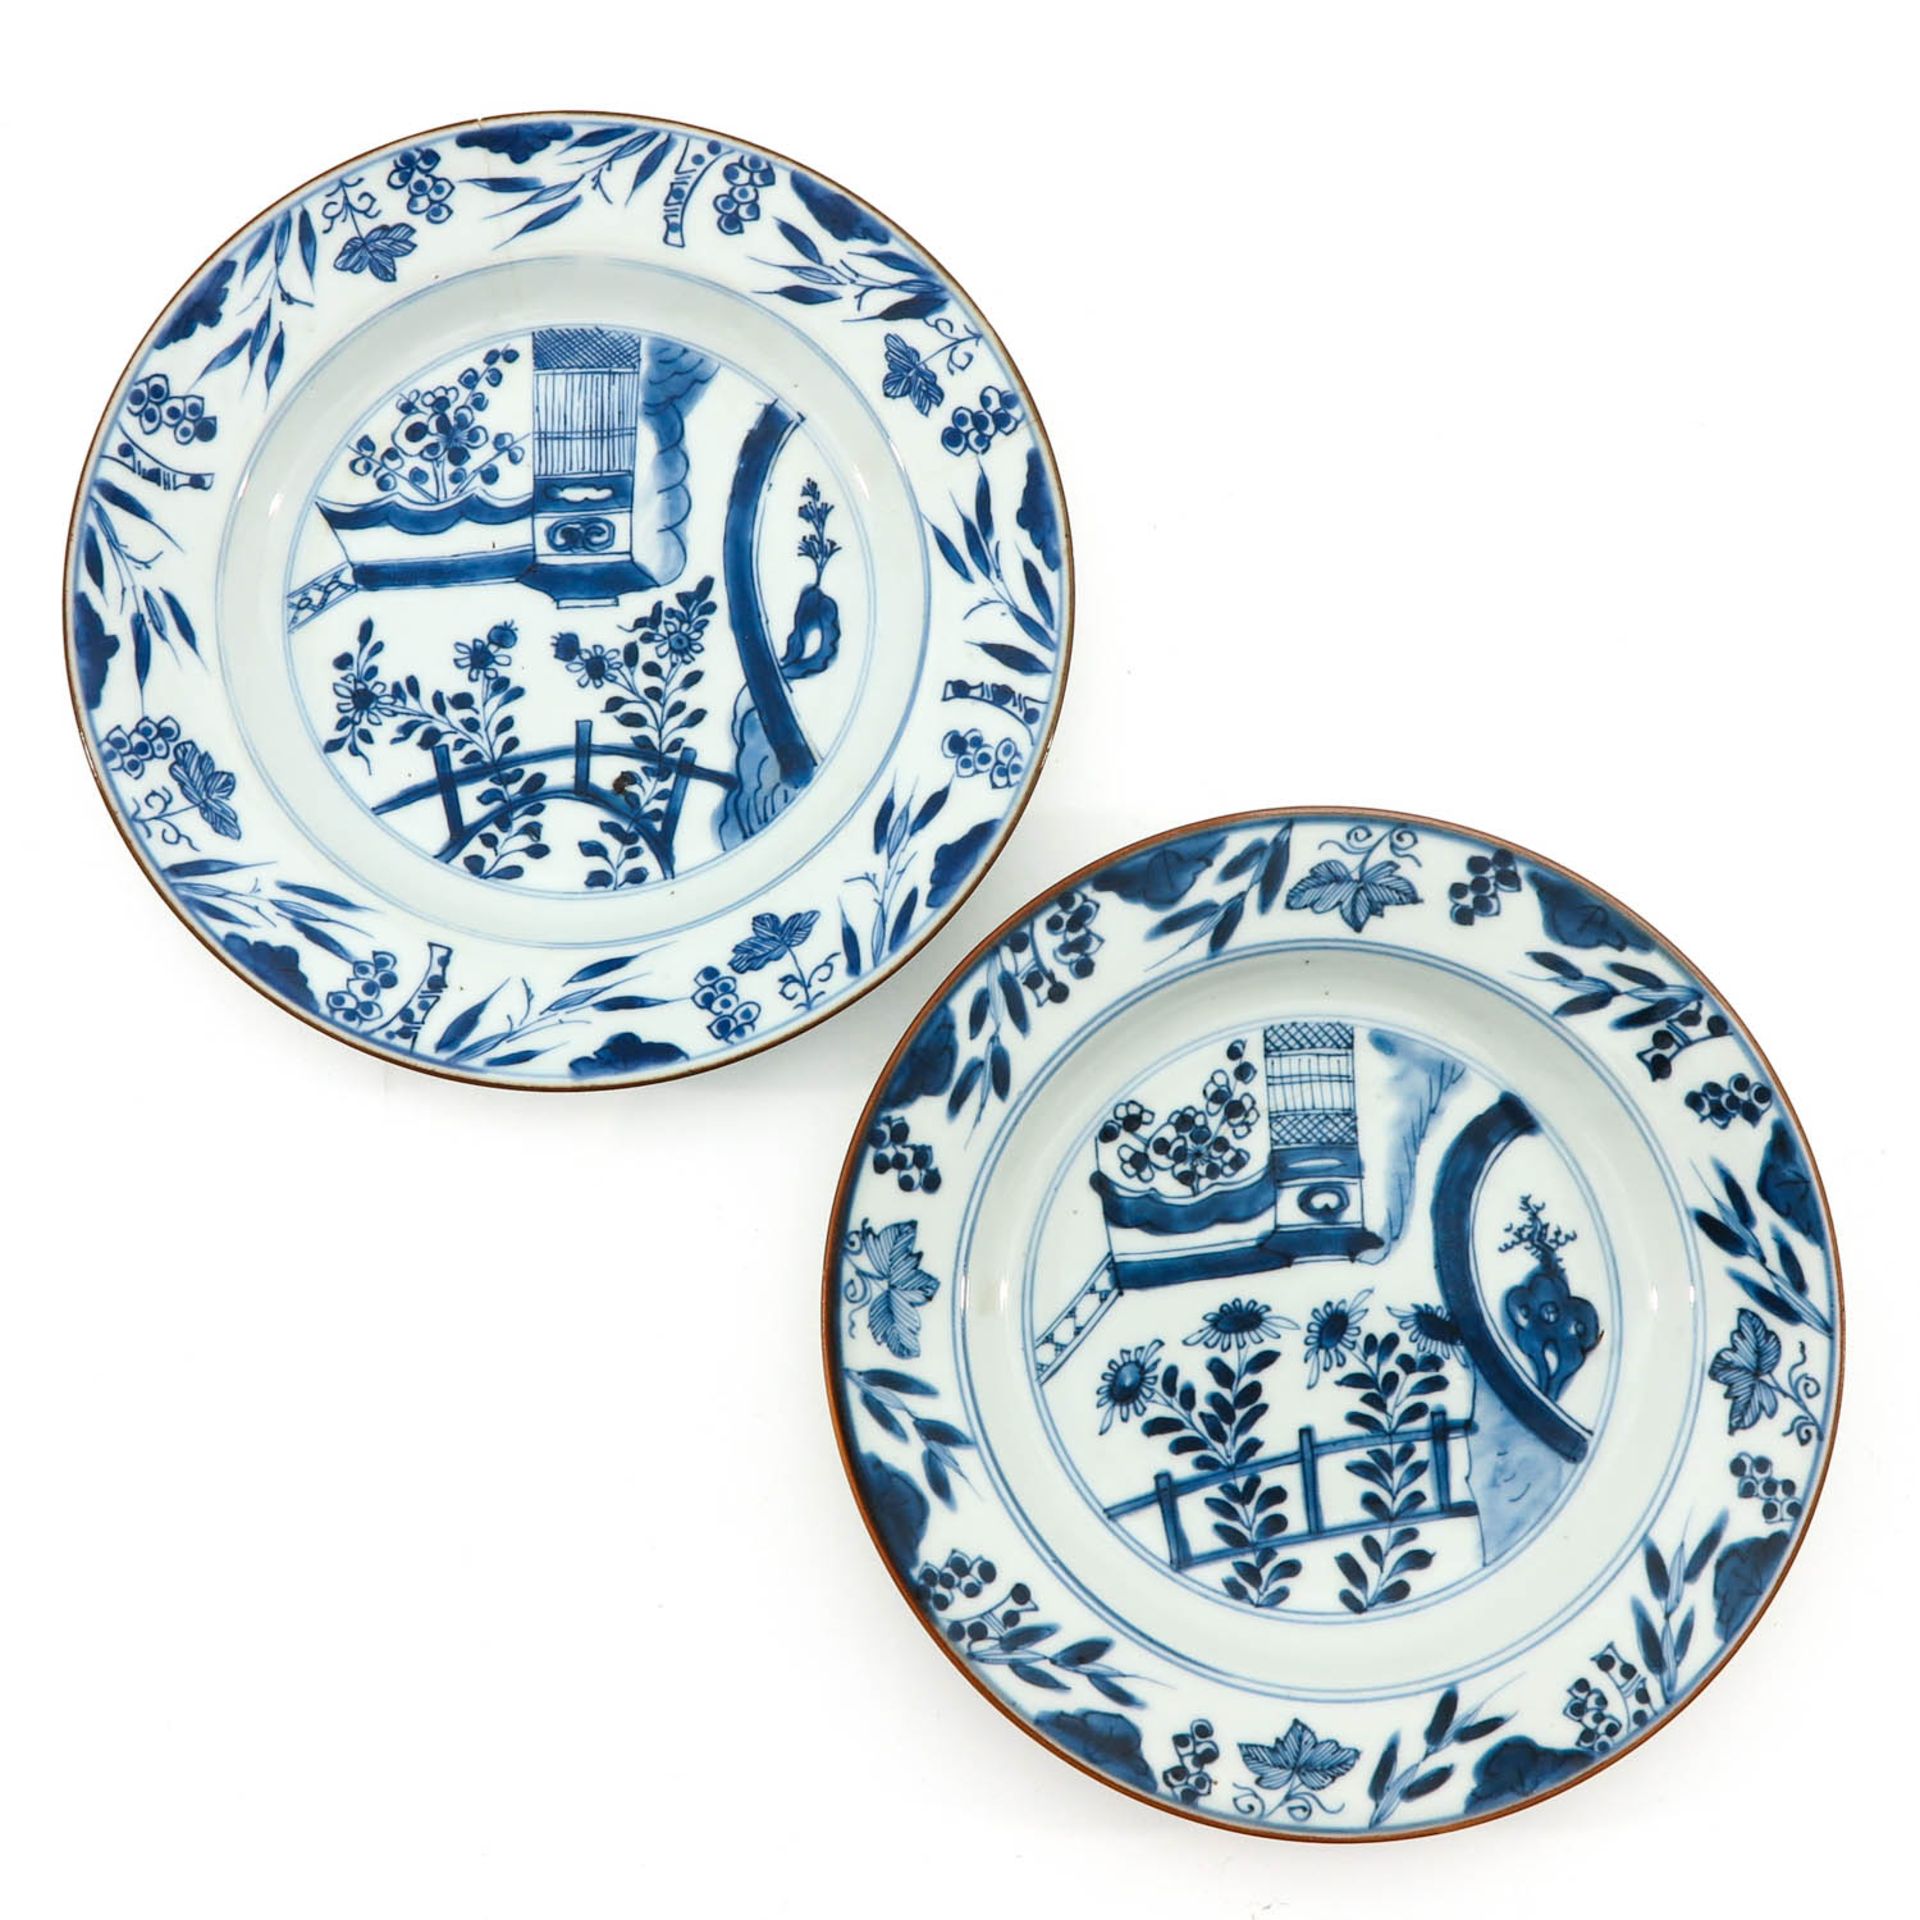 A Series of 6 Blue and White Plates - Image 3 of 10